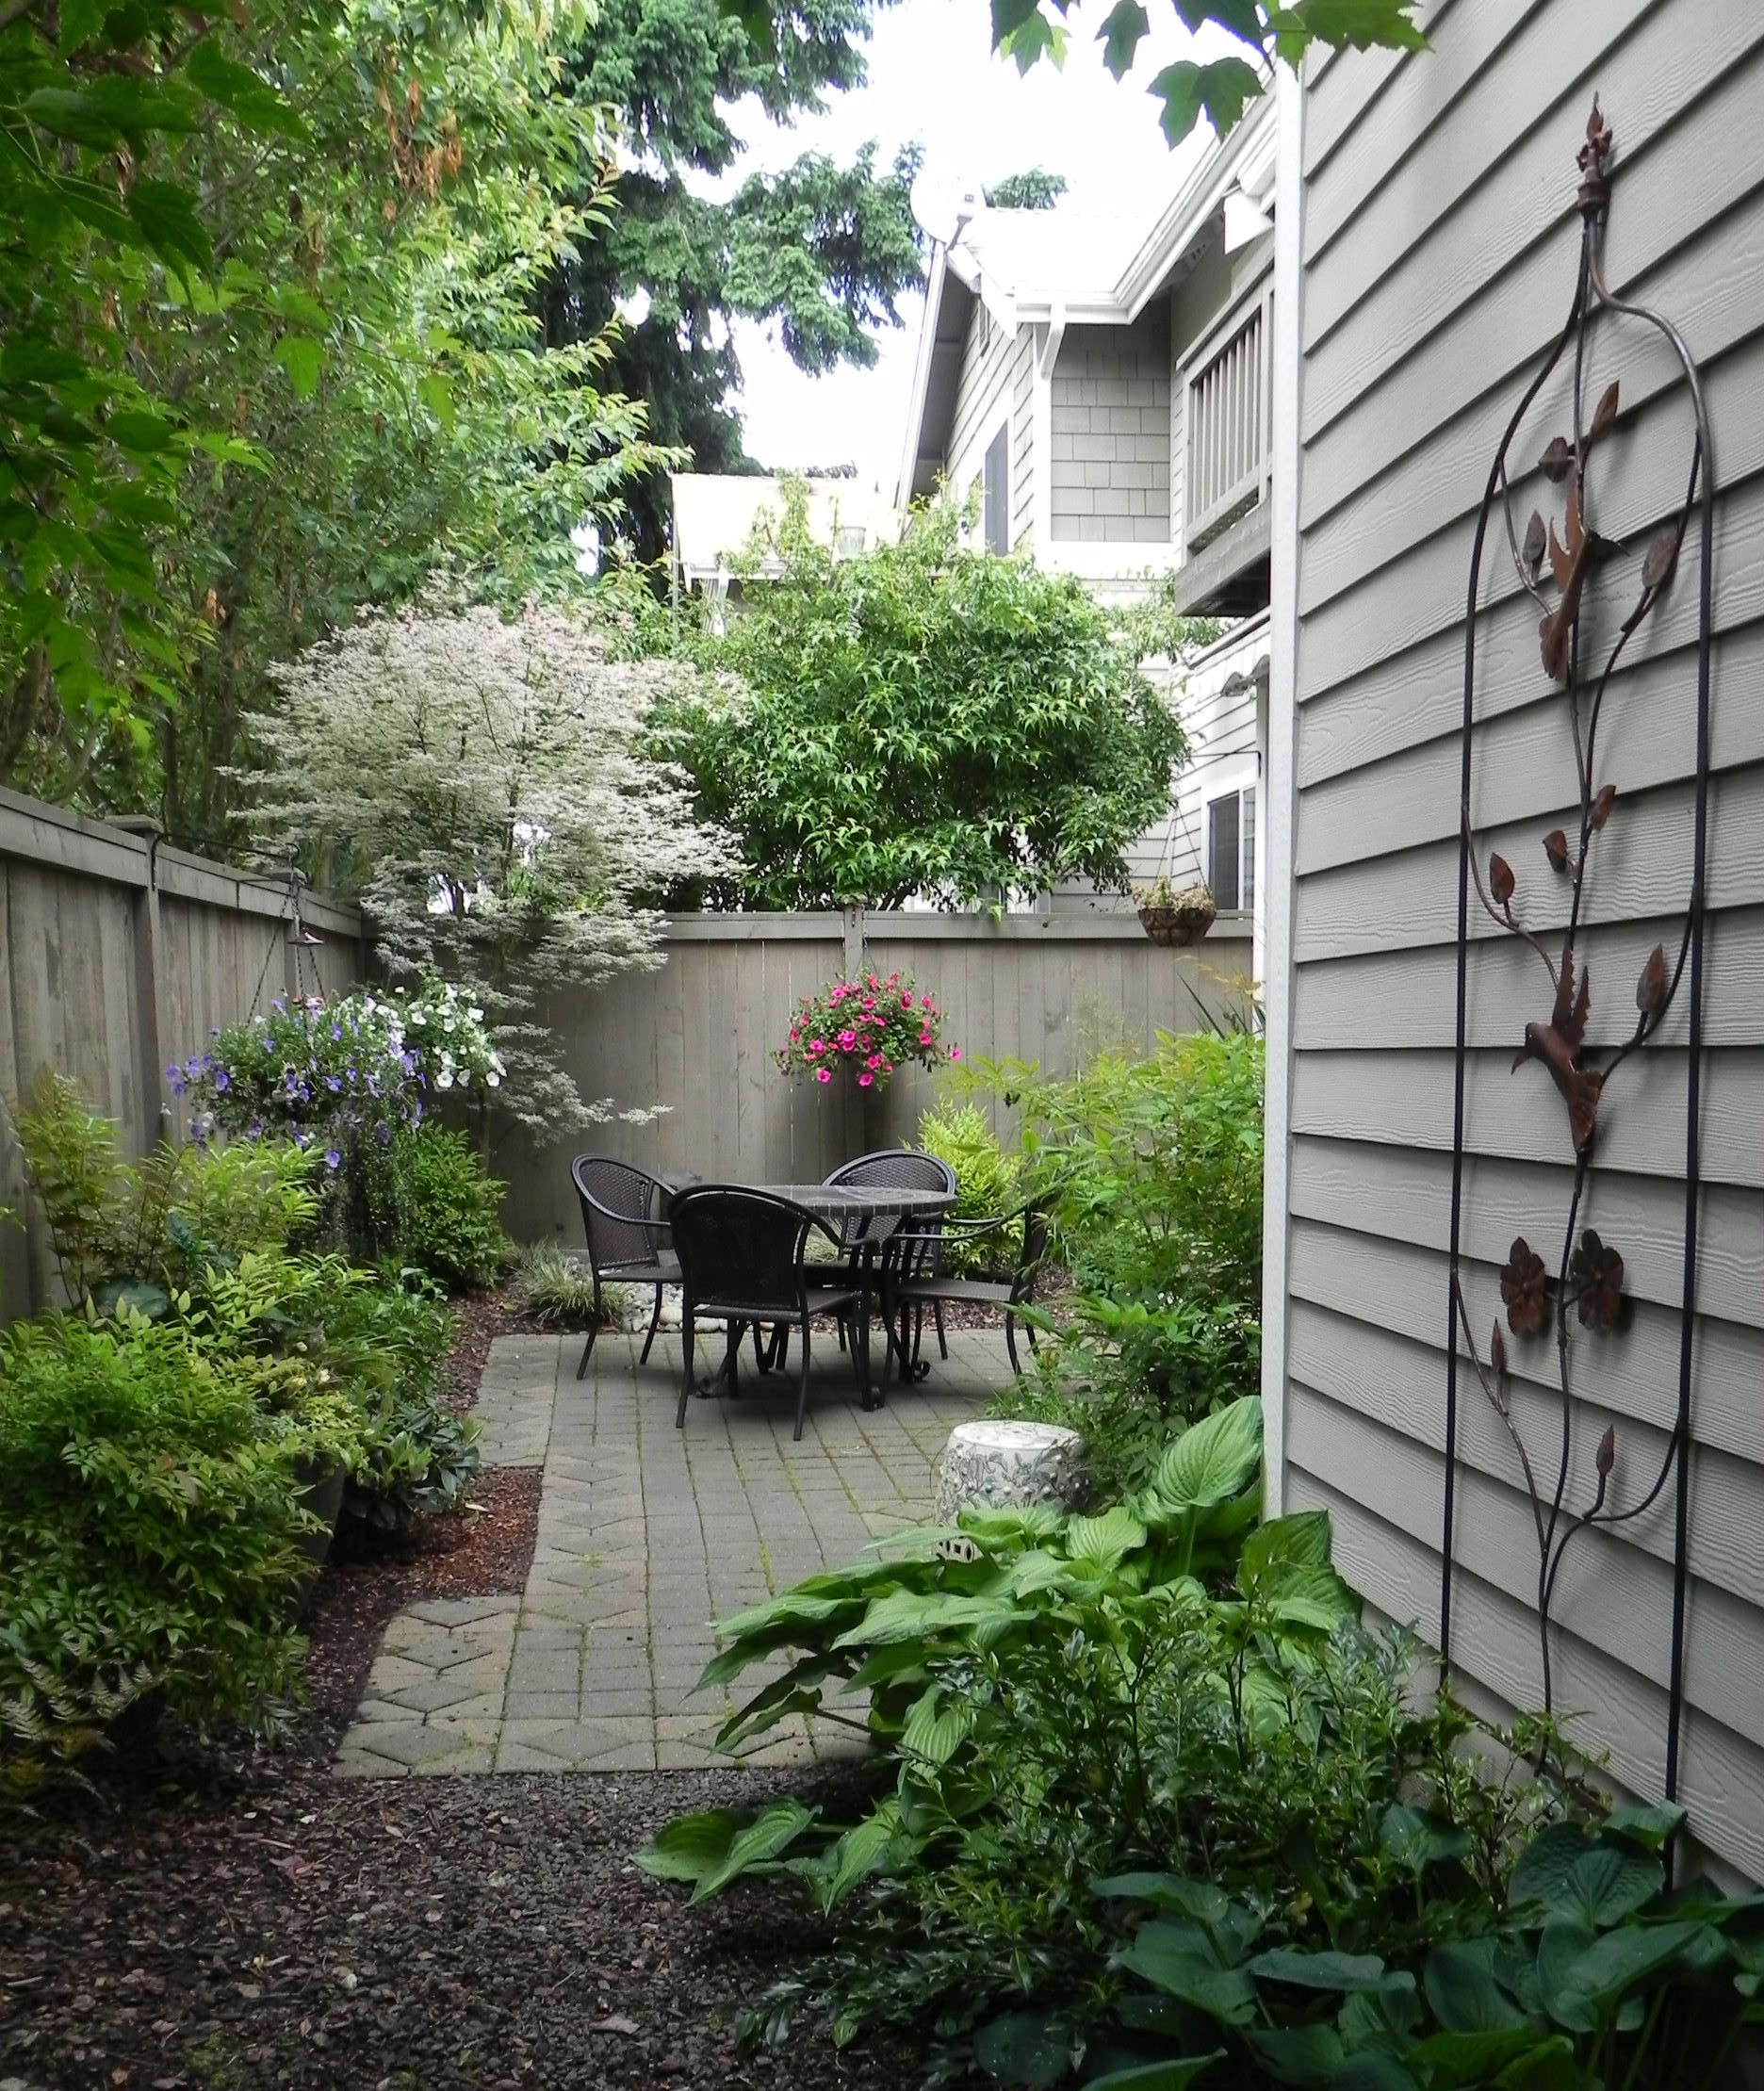 Outdoor Landscape Small Space
 Garden Design Tips to Deal with Small Space TheyDesign